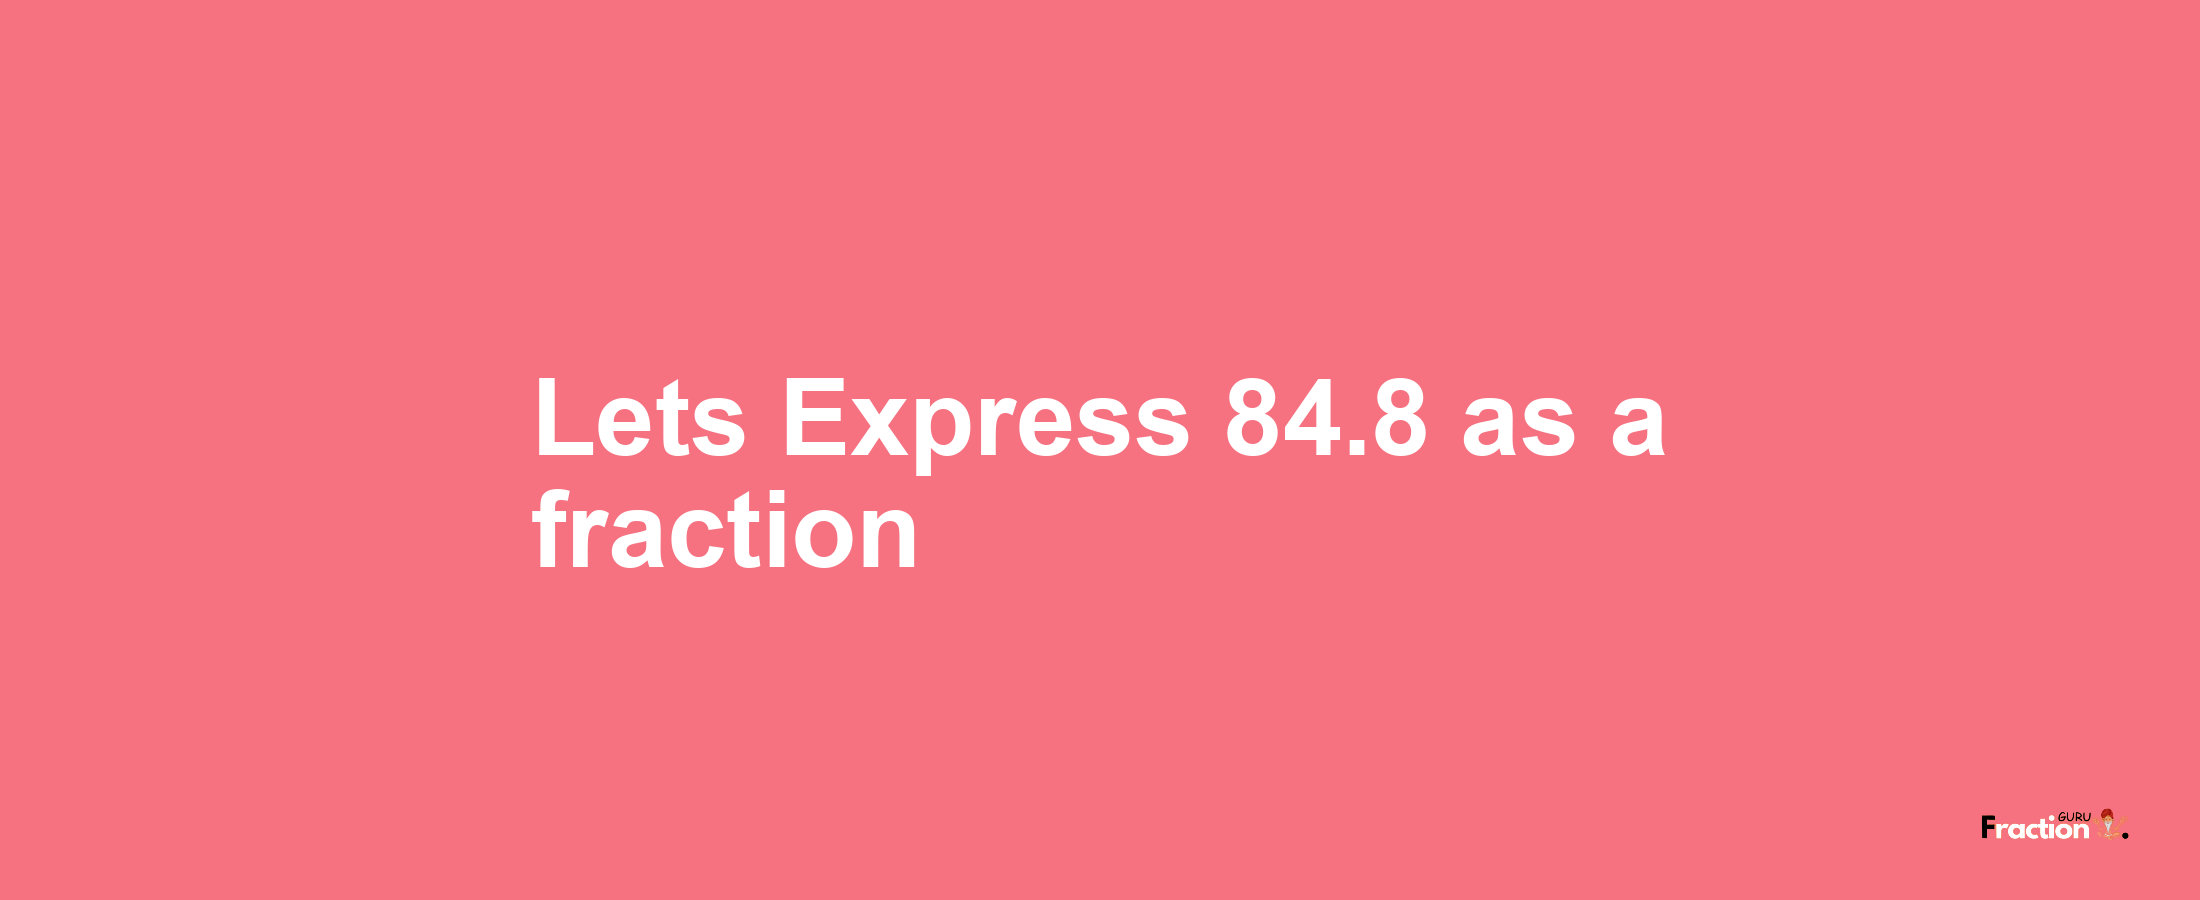 Lets Express 84.8 as afraction